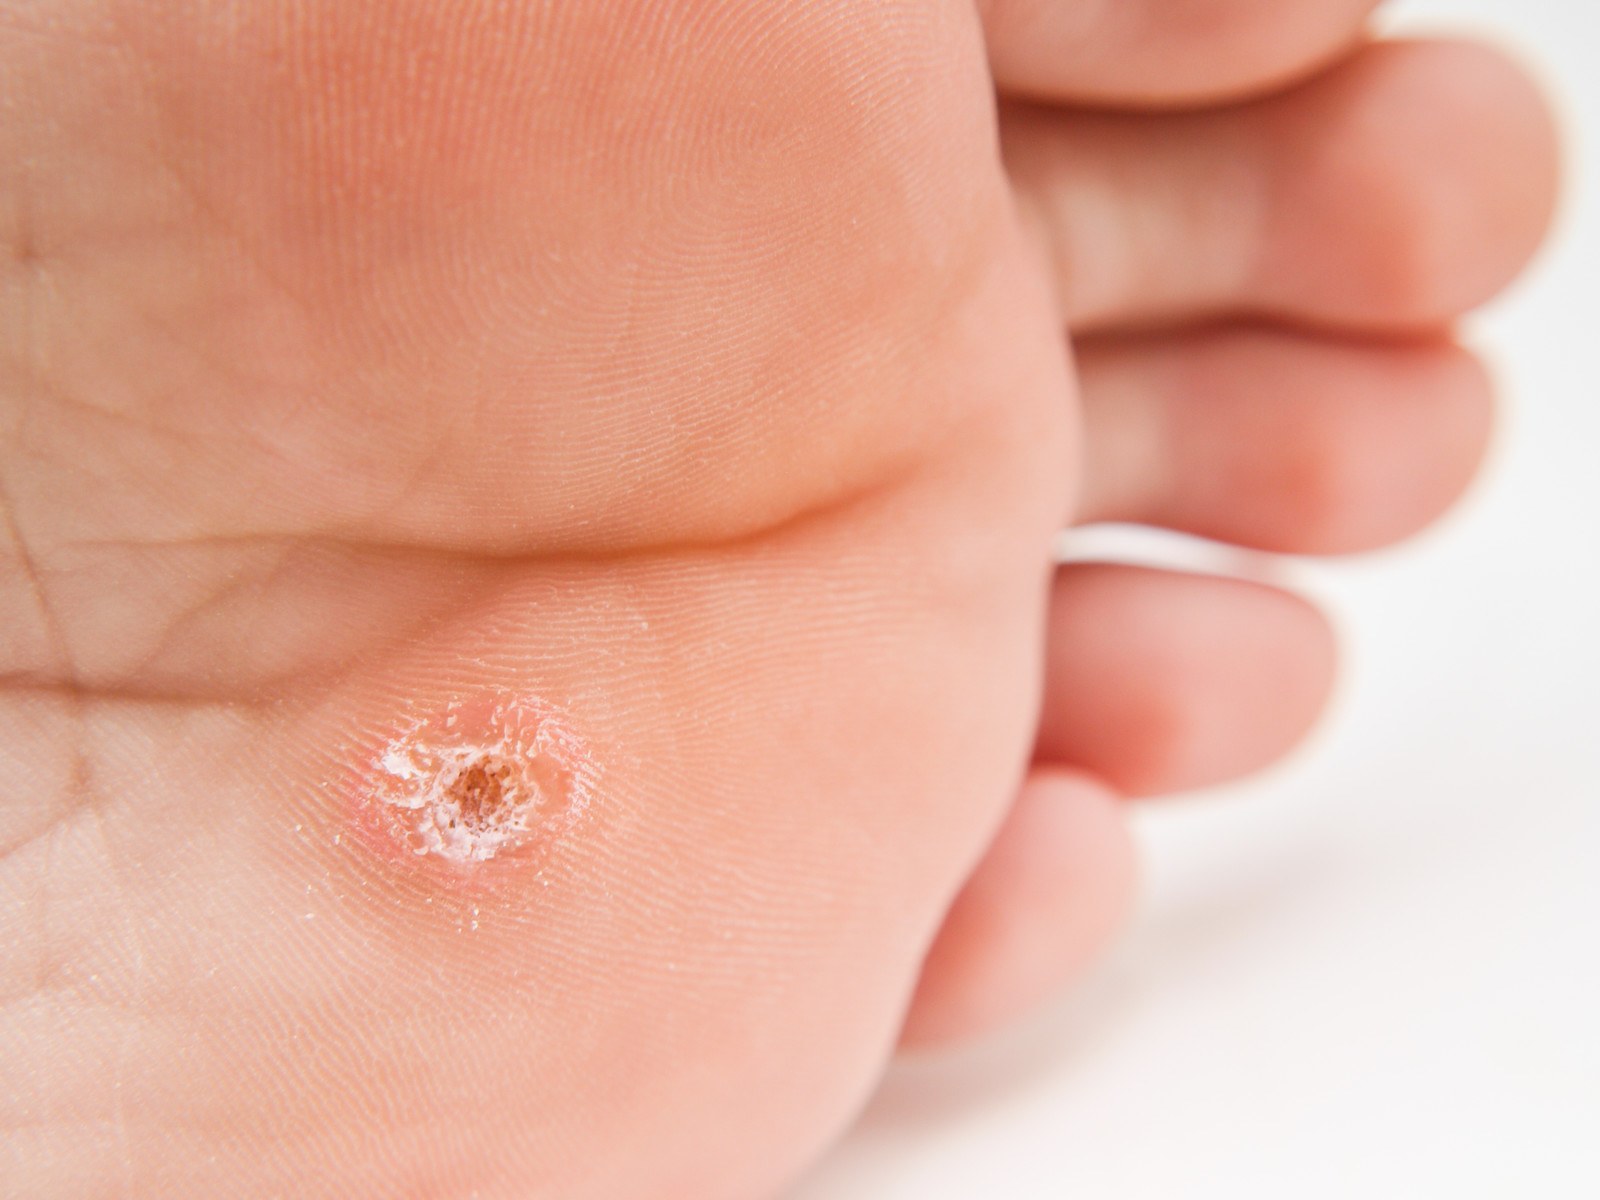 wart treatment melbourne what does papillomatosis mean